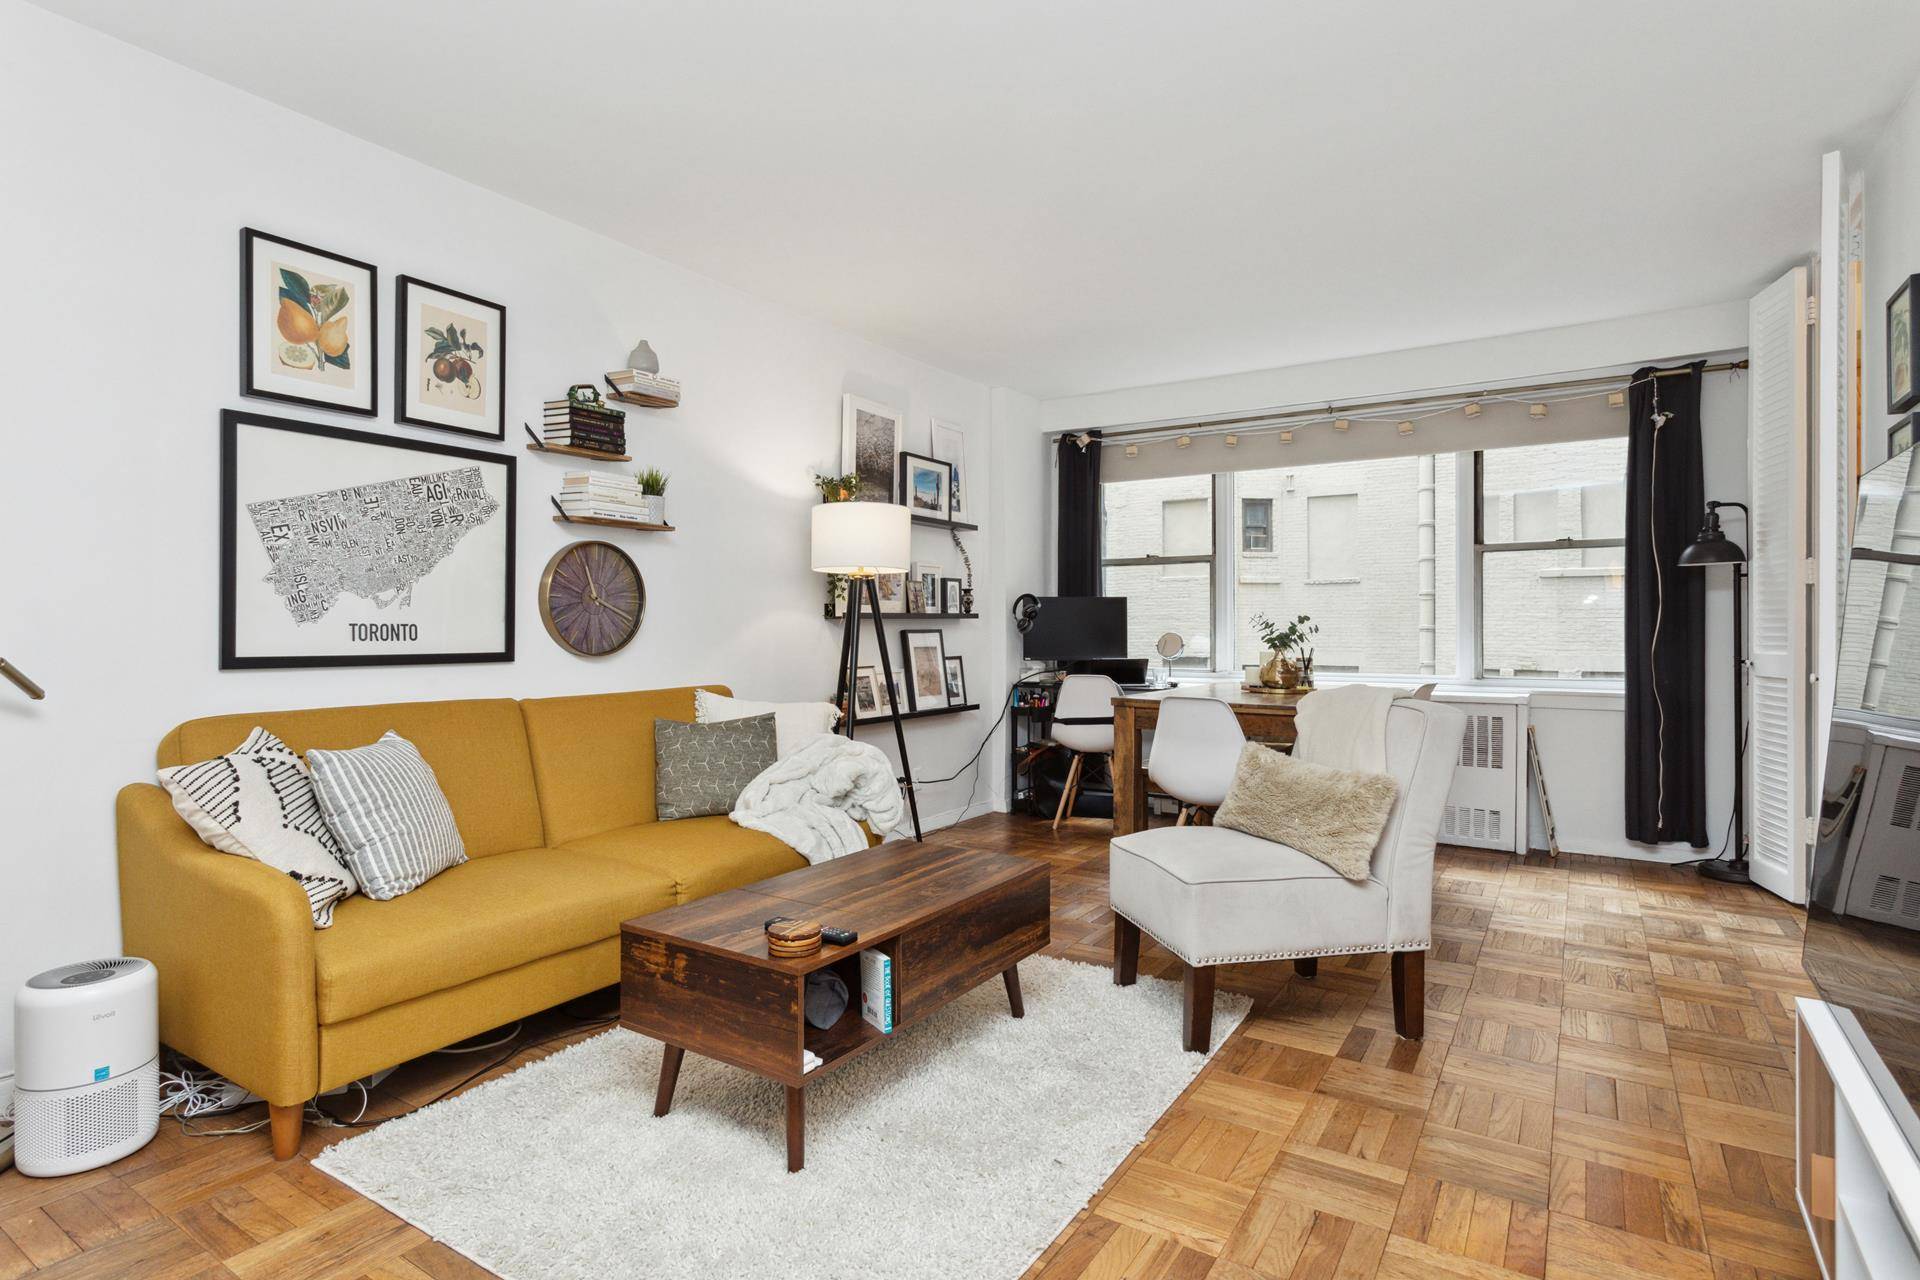 This apt is located in a 24 hr doorman bldg in fabulous Murray Hill which is centrally located near Grand Central and NYU Langone Medical Center.